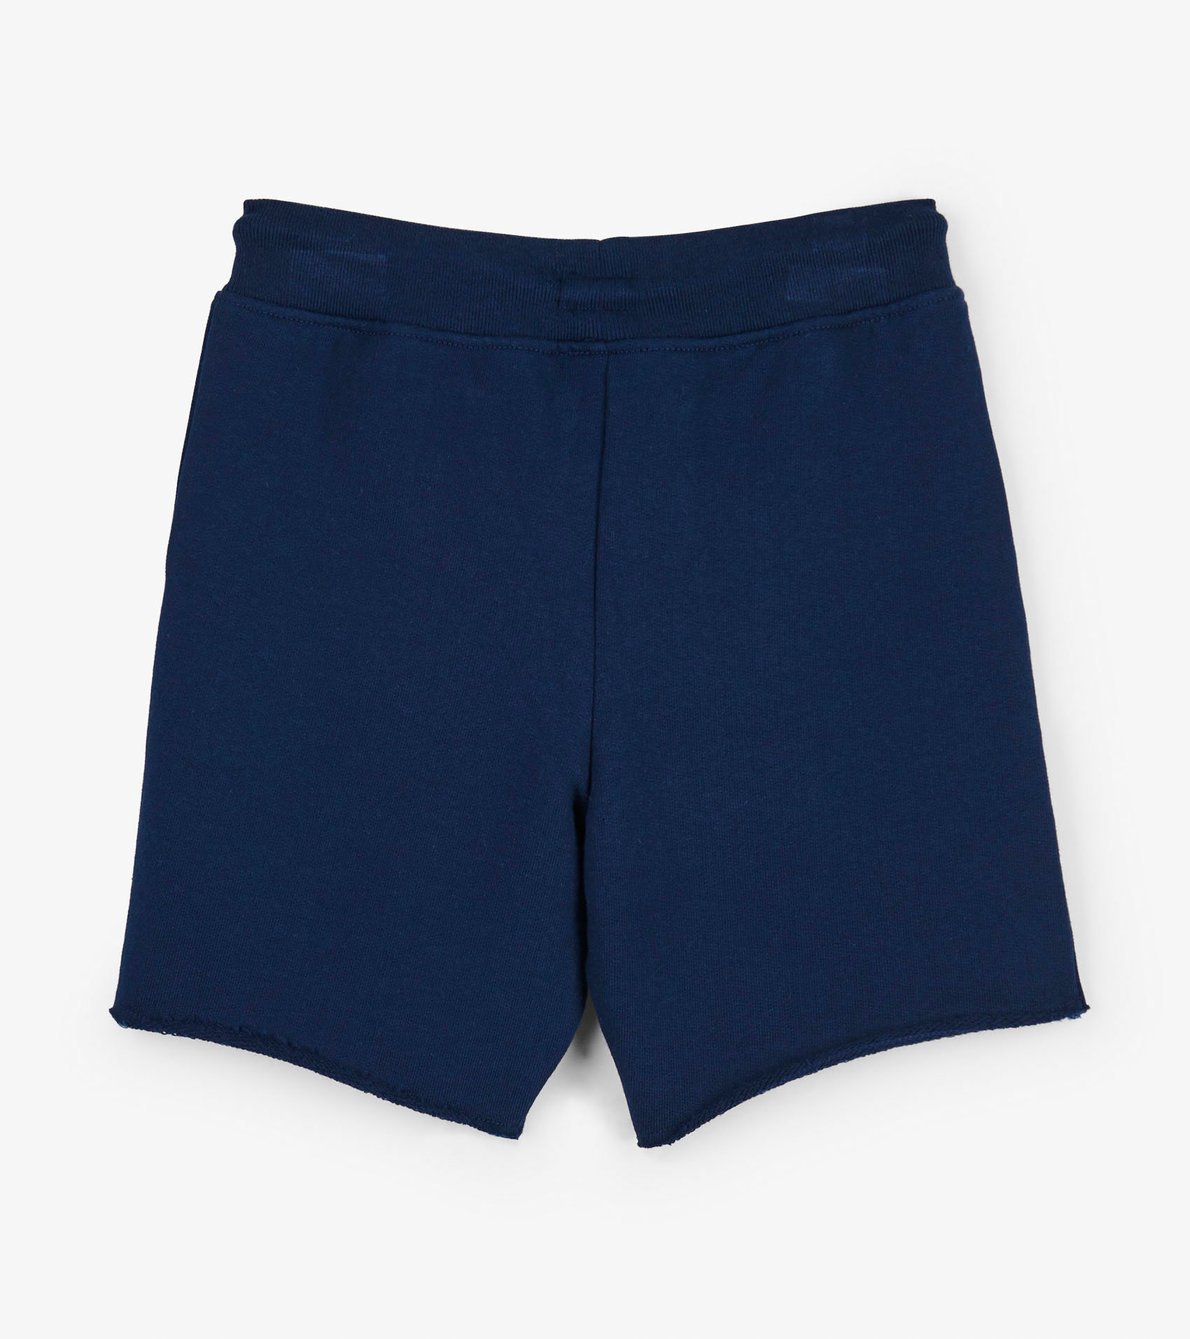 View larger image of Navy French Terry Shorts